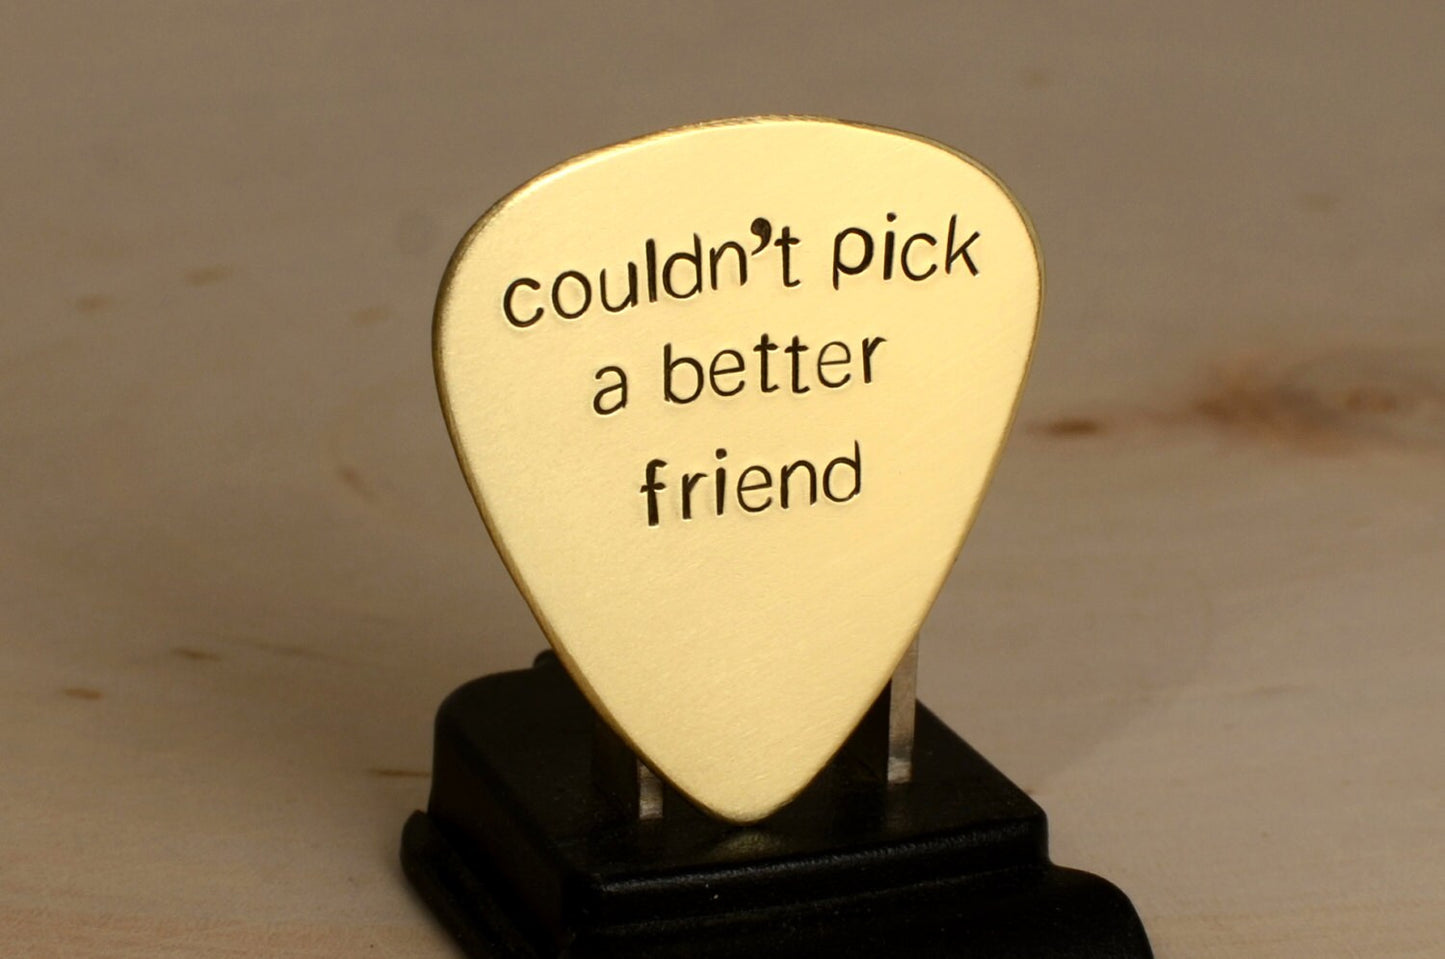 Couldn't pick a better friend guitar pick in brass